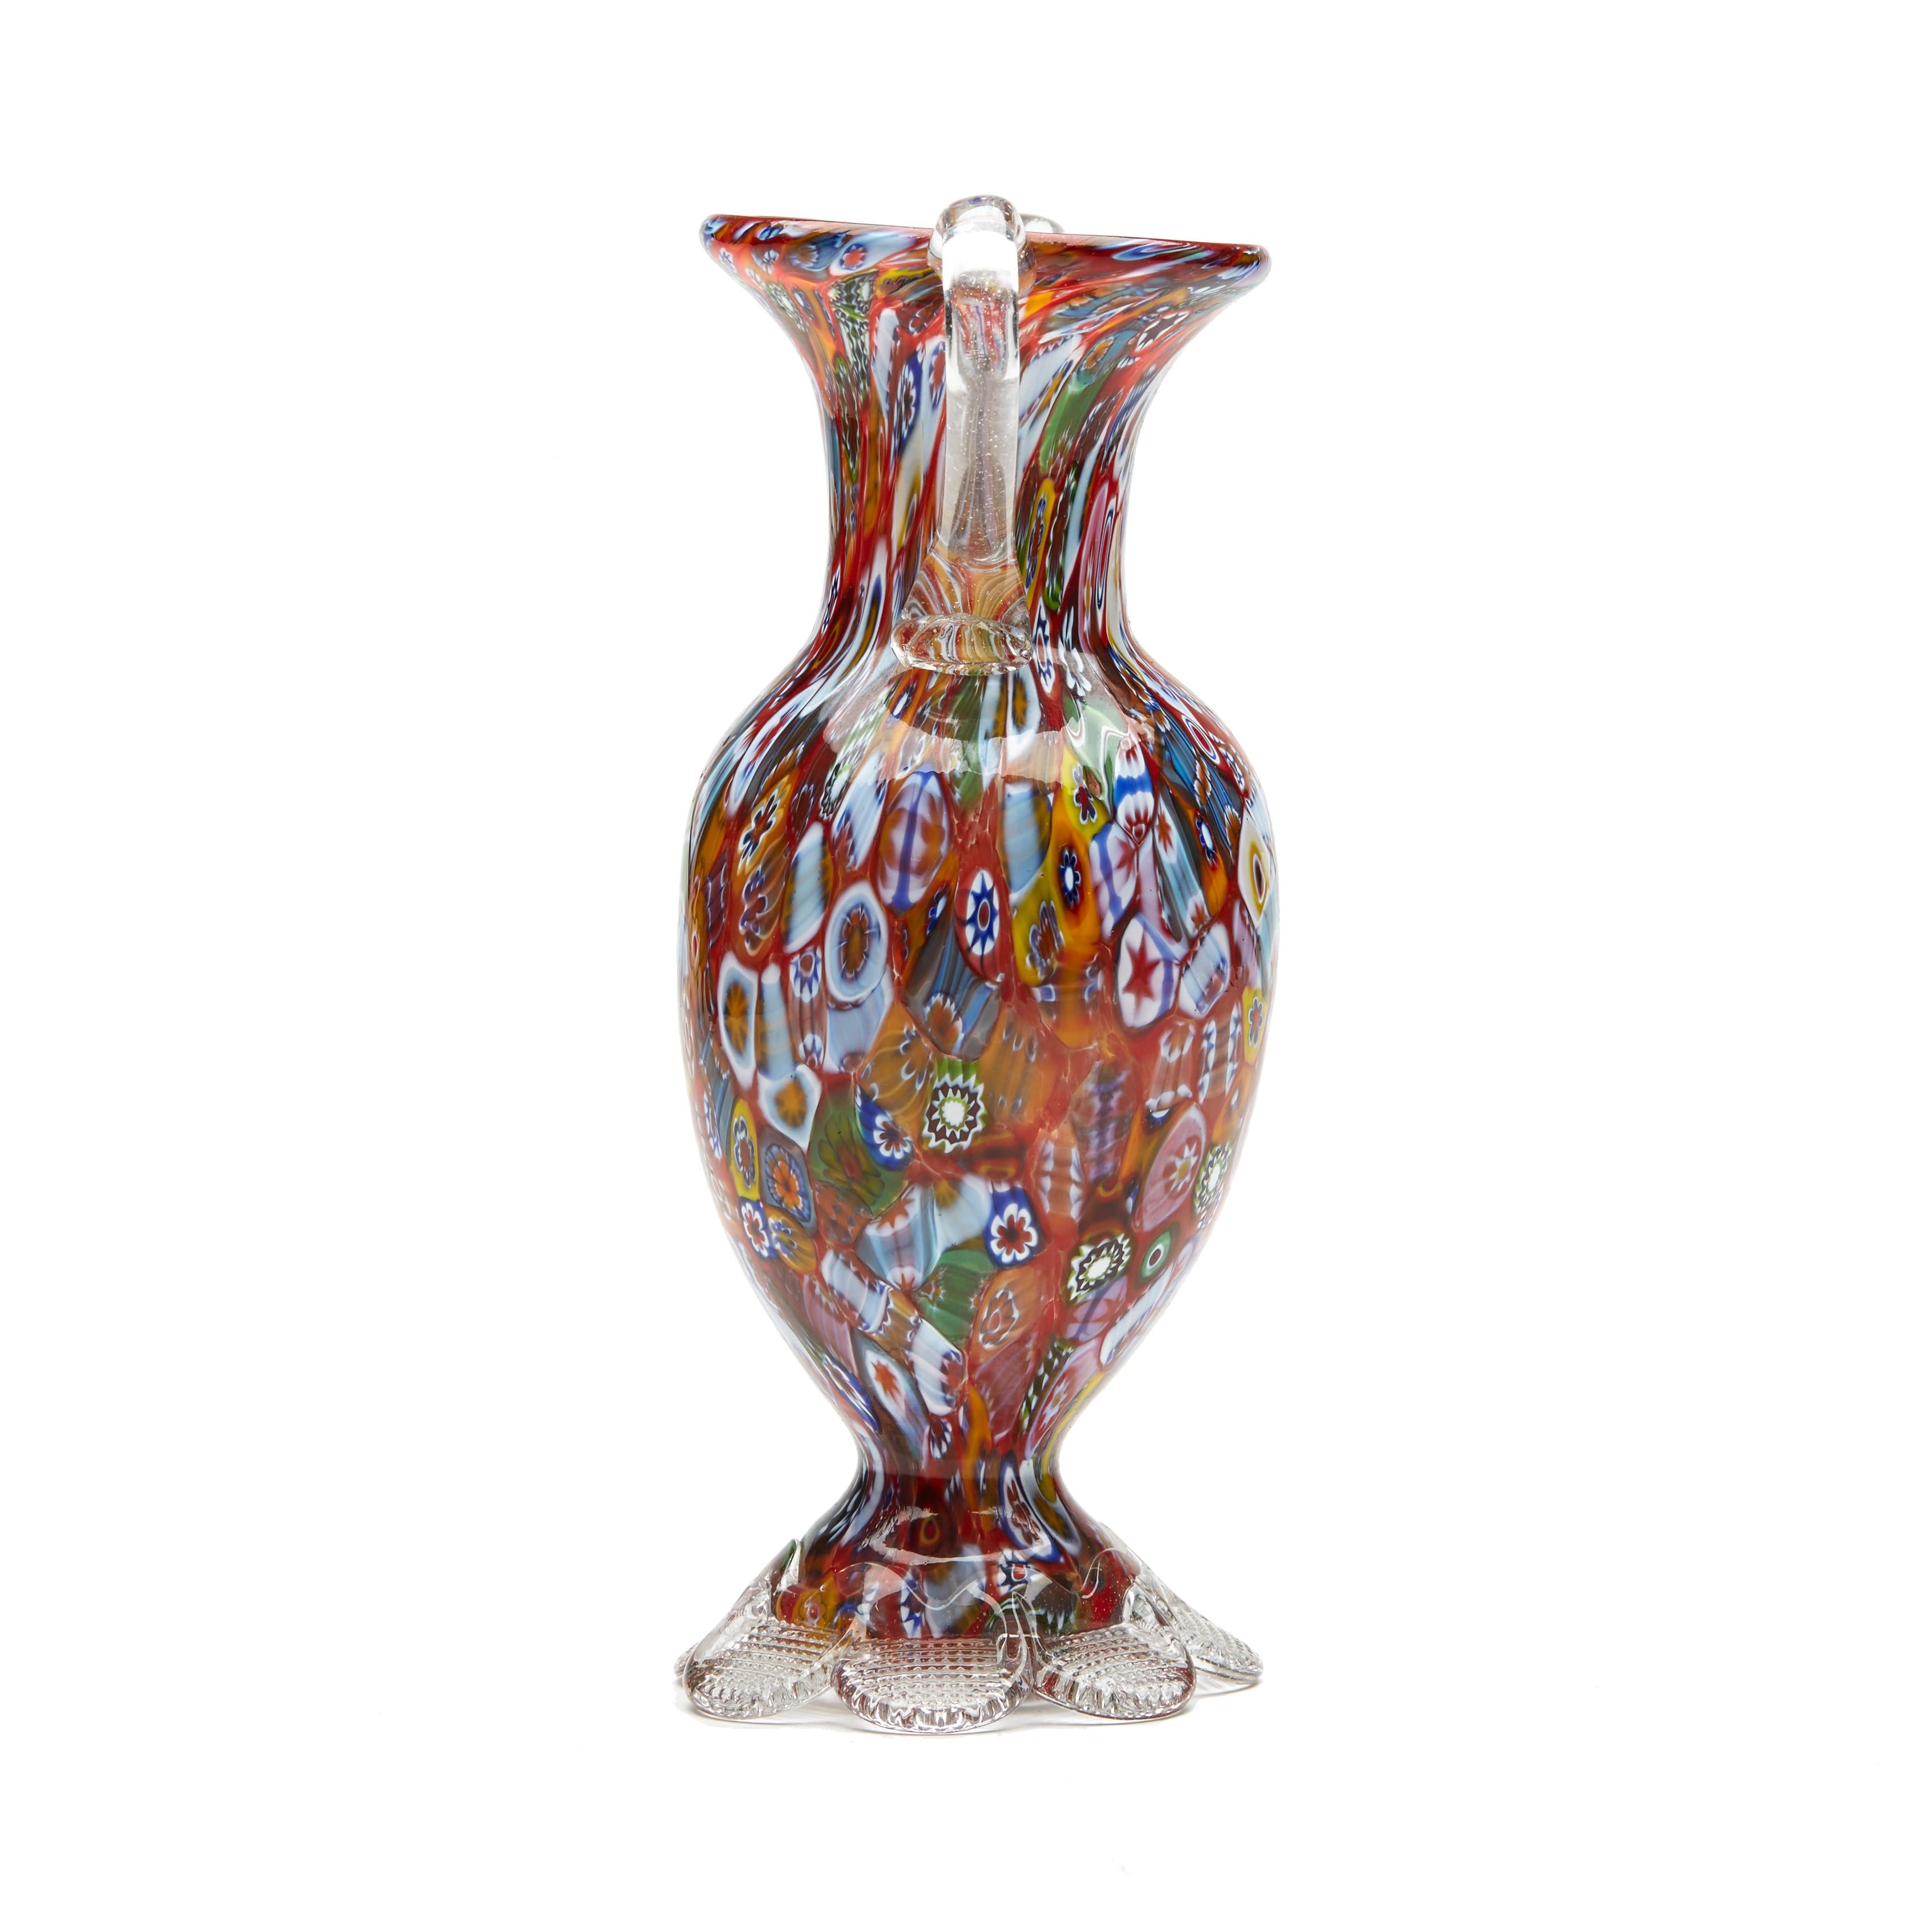 A stylish vintage Italian Murano twin handled millefiori vase by Fratelli & Toso. The hand blown glass vase stands on a clear glass petal shaped foot each impressed with a grid pattern from beneath supporting a bulbous shaped body with a narrowing